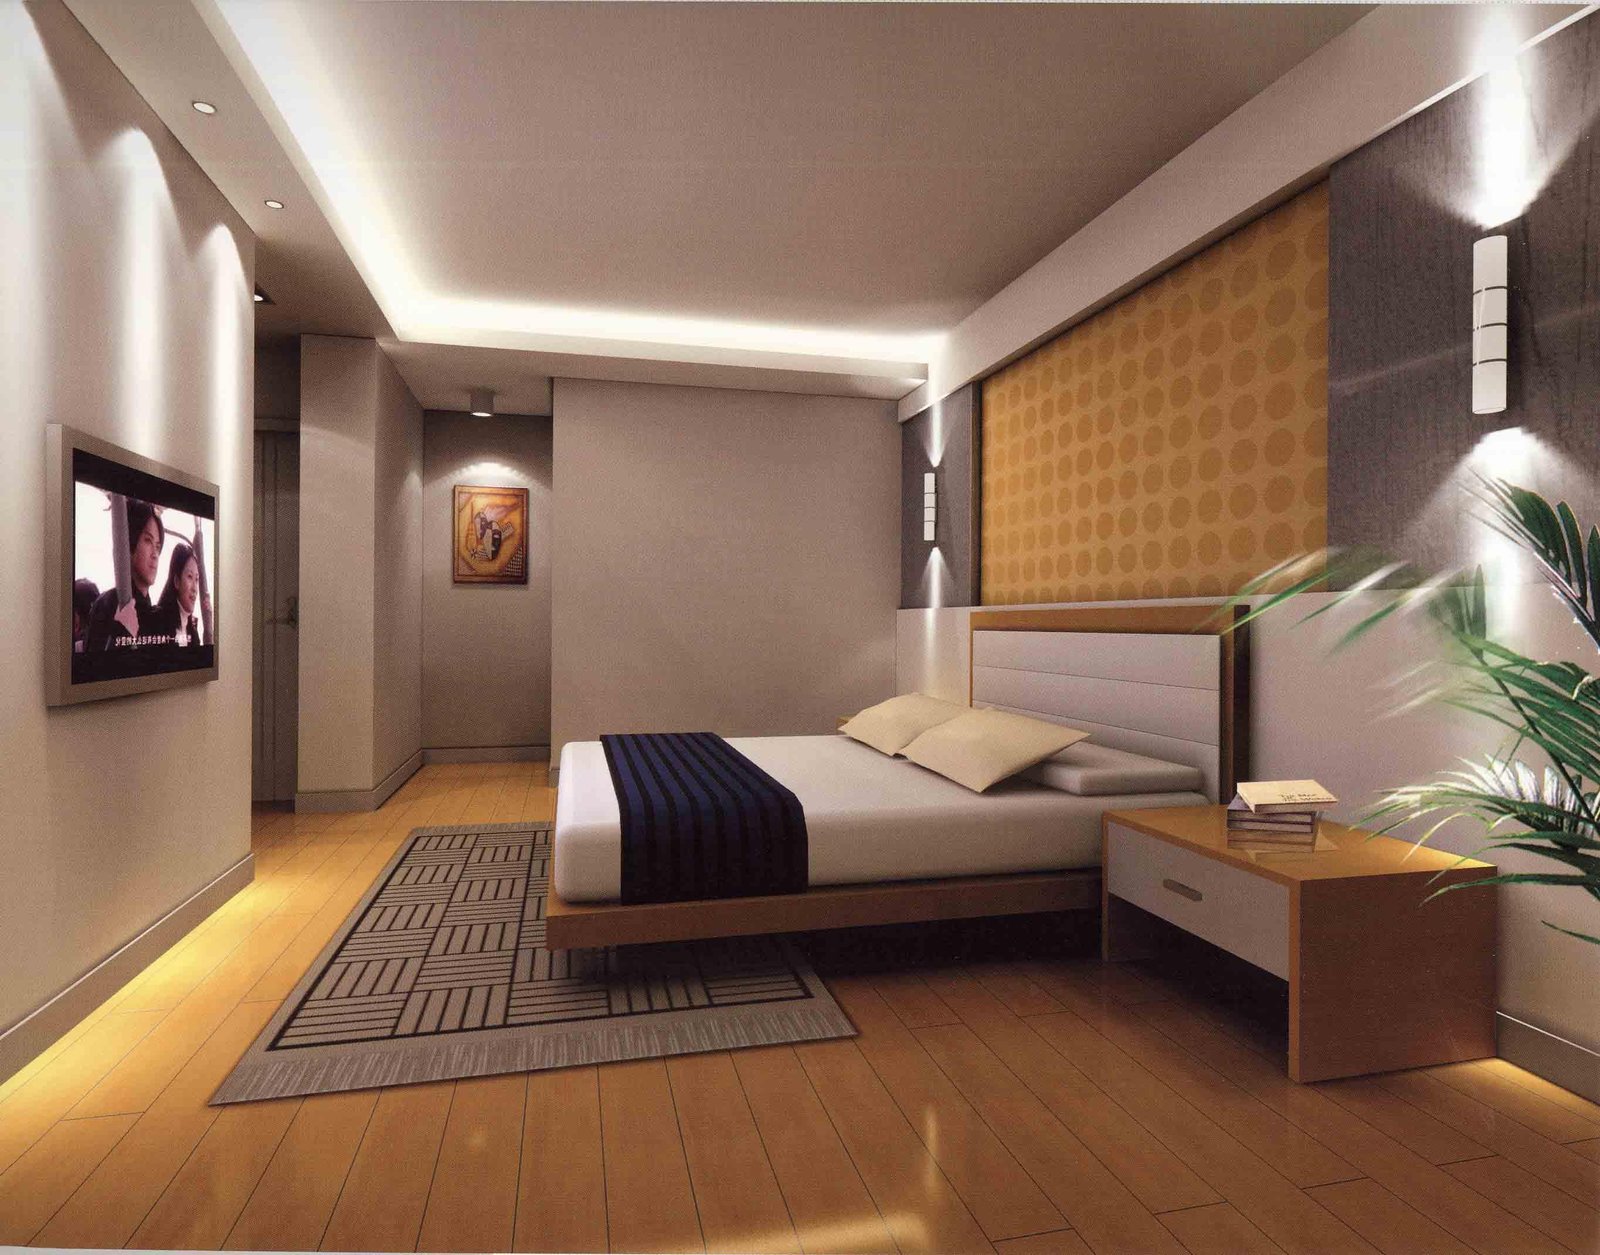 master bedroom ideas with living room